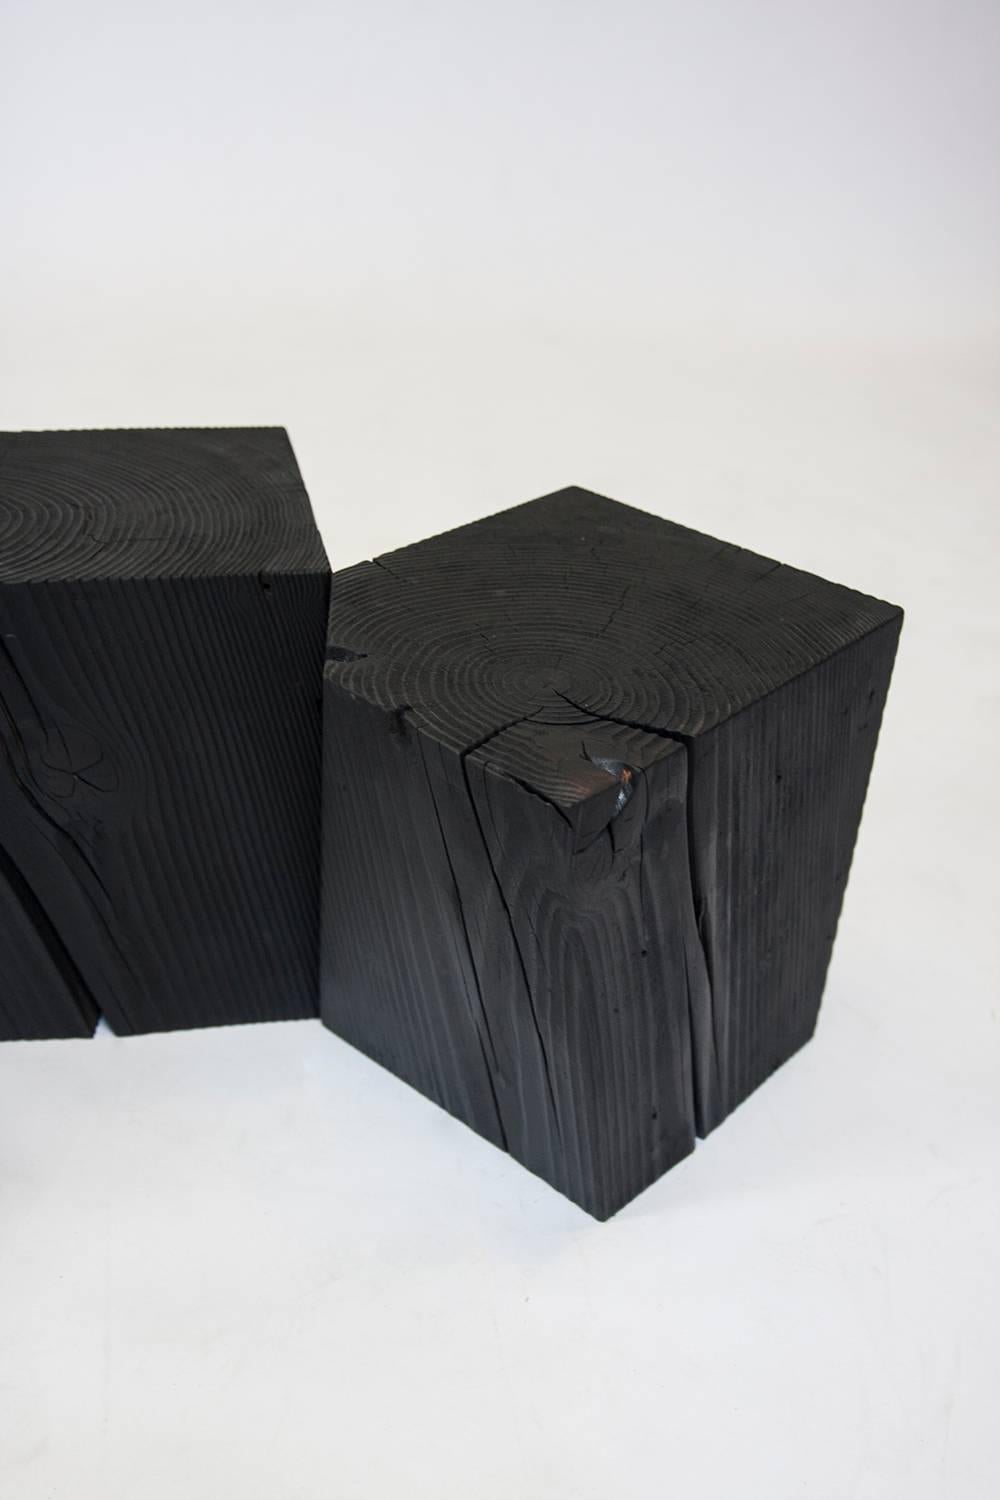 Contemporary Charcoal Blocks, Sculptural, Geometric, Shou Sugi Ban Coffee or Side Tables For Sale